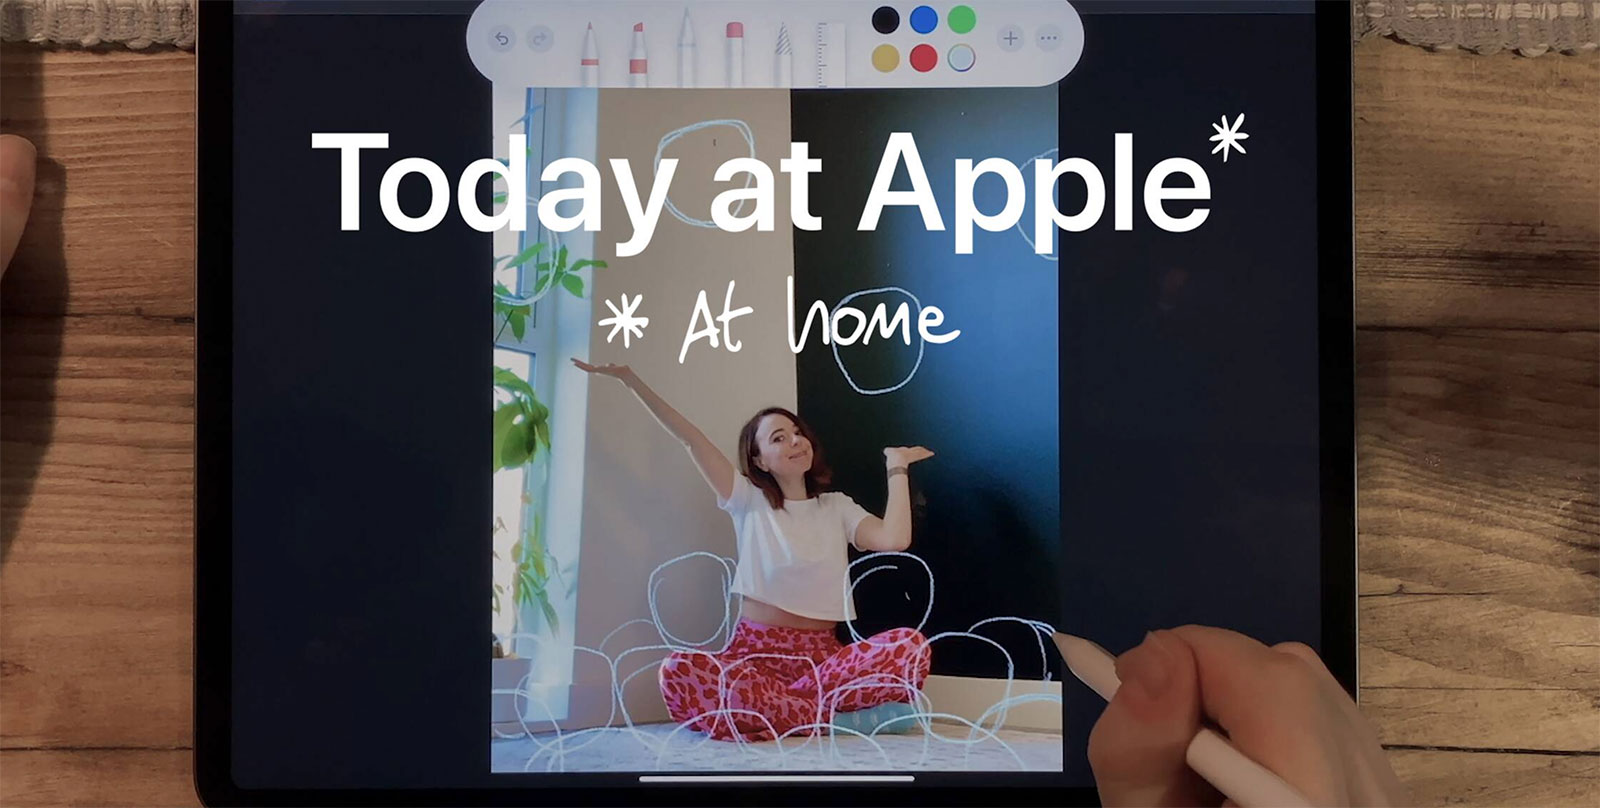 Today at Apple, at home